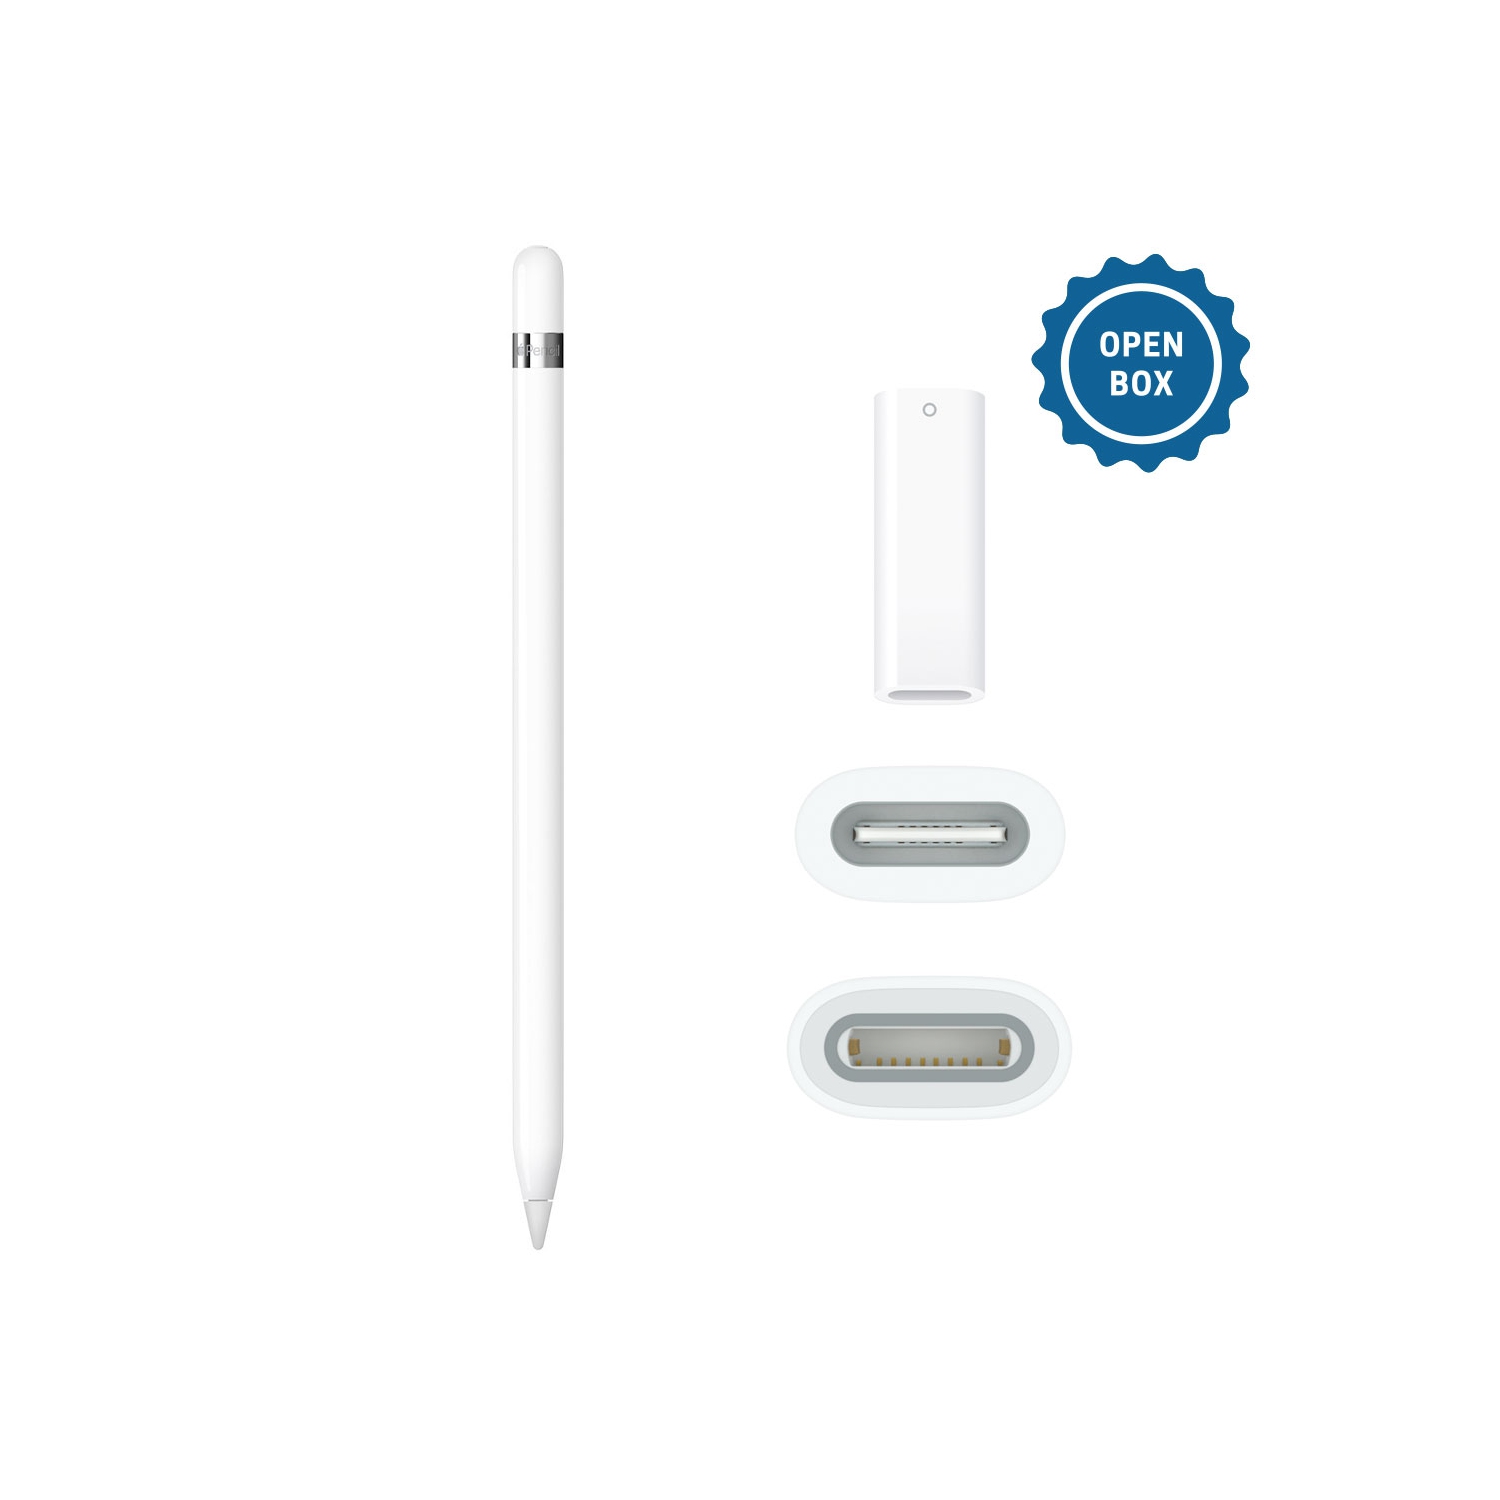 Open Box - Apple Pencil (1st Generation) with USB-C to Apple Pencil Adapter